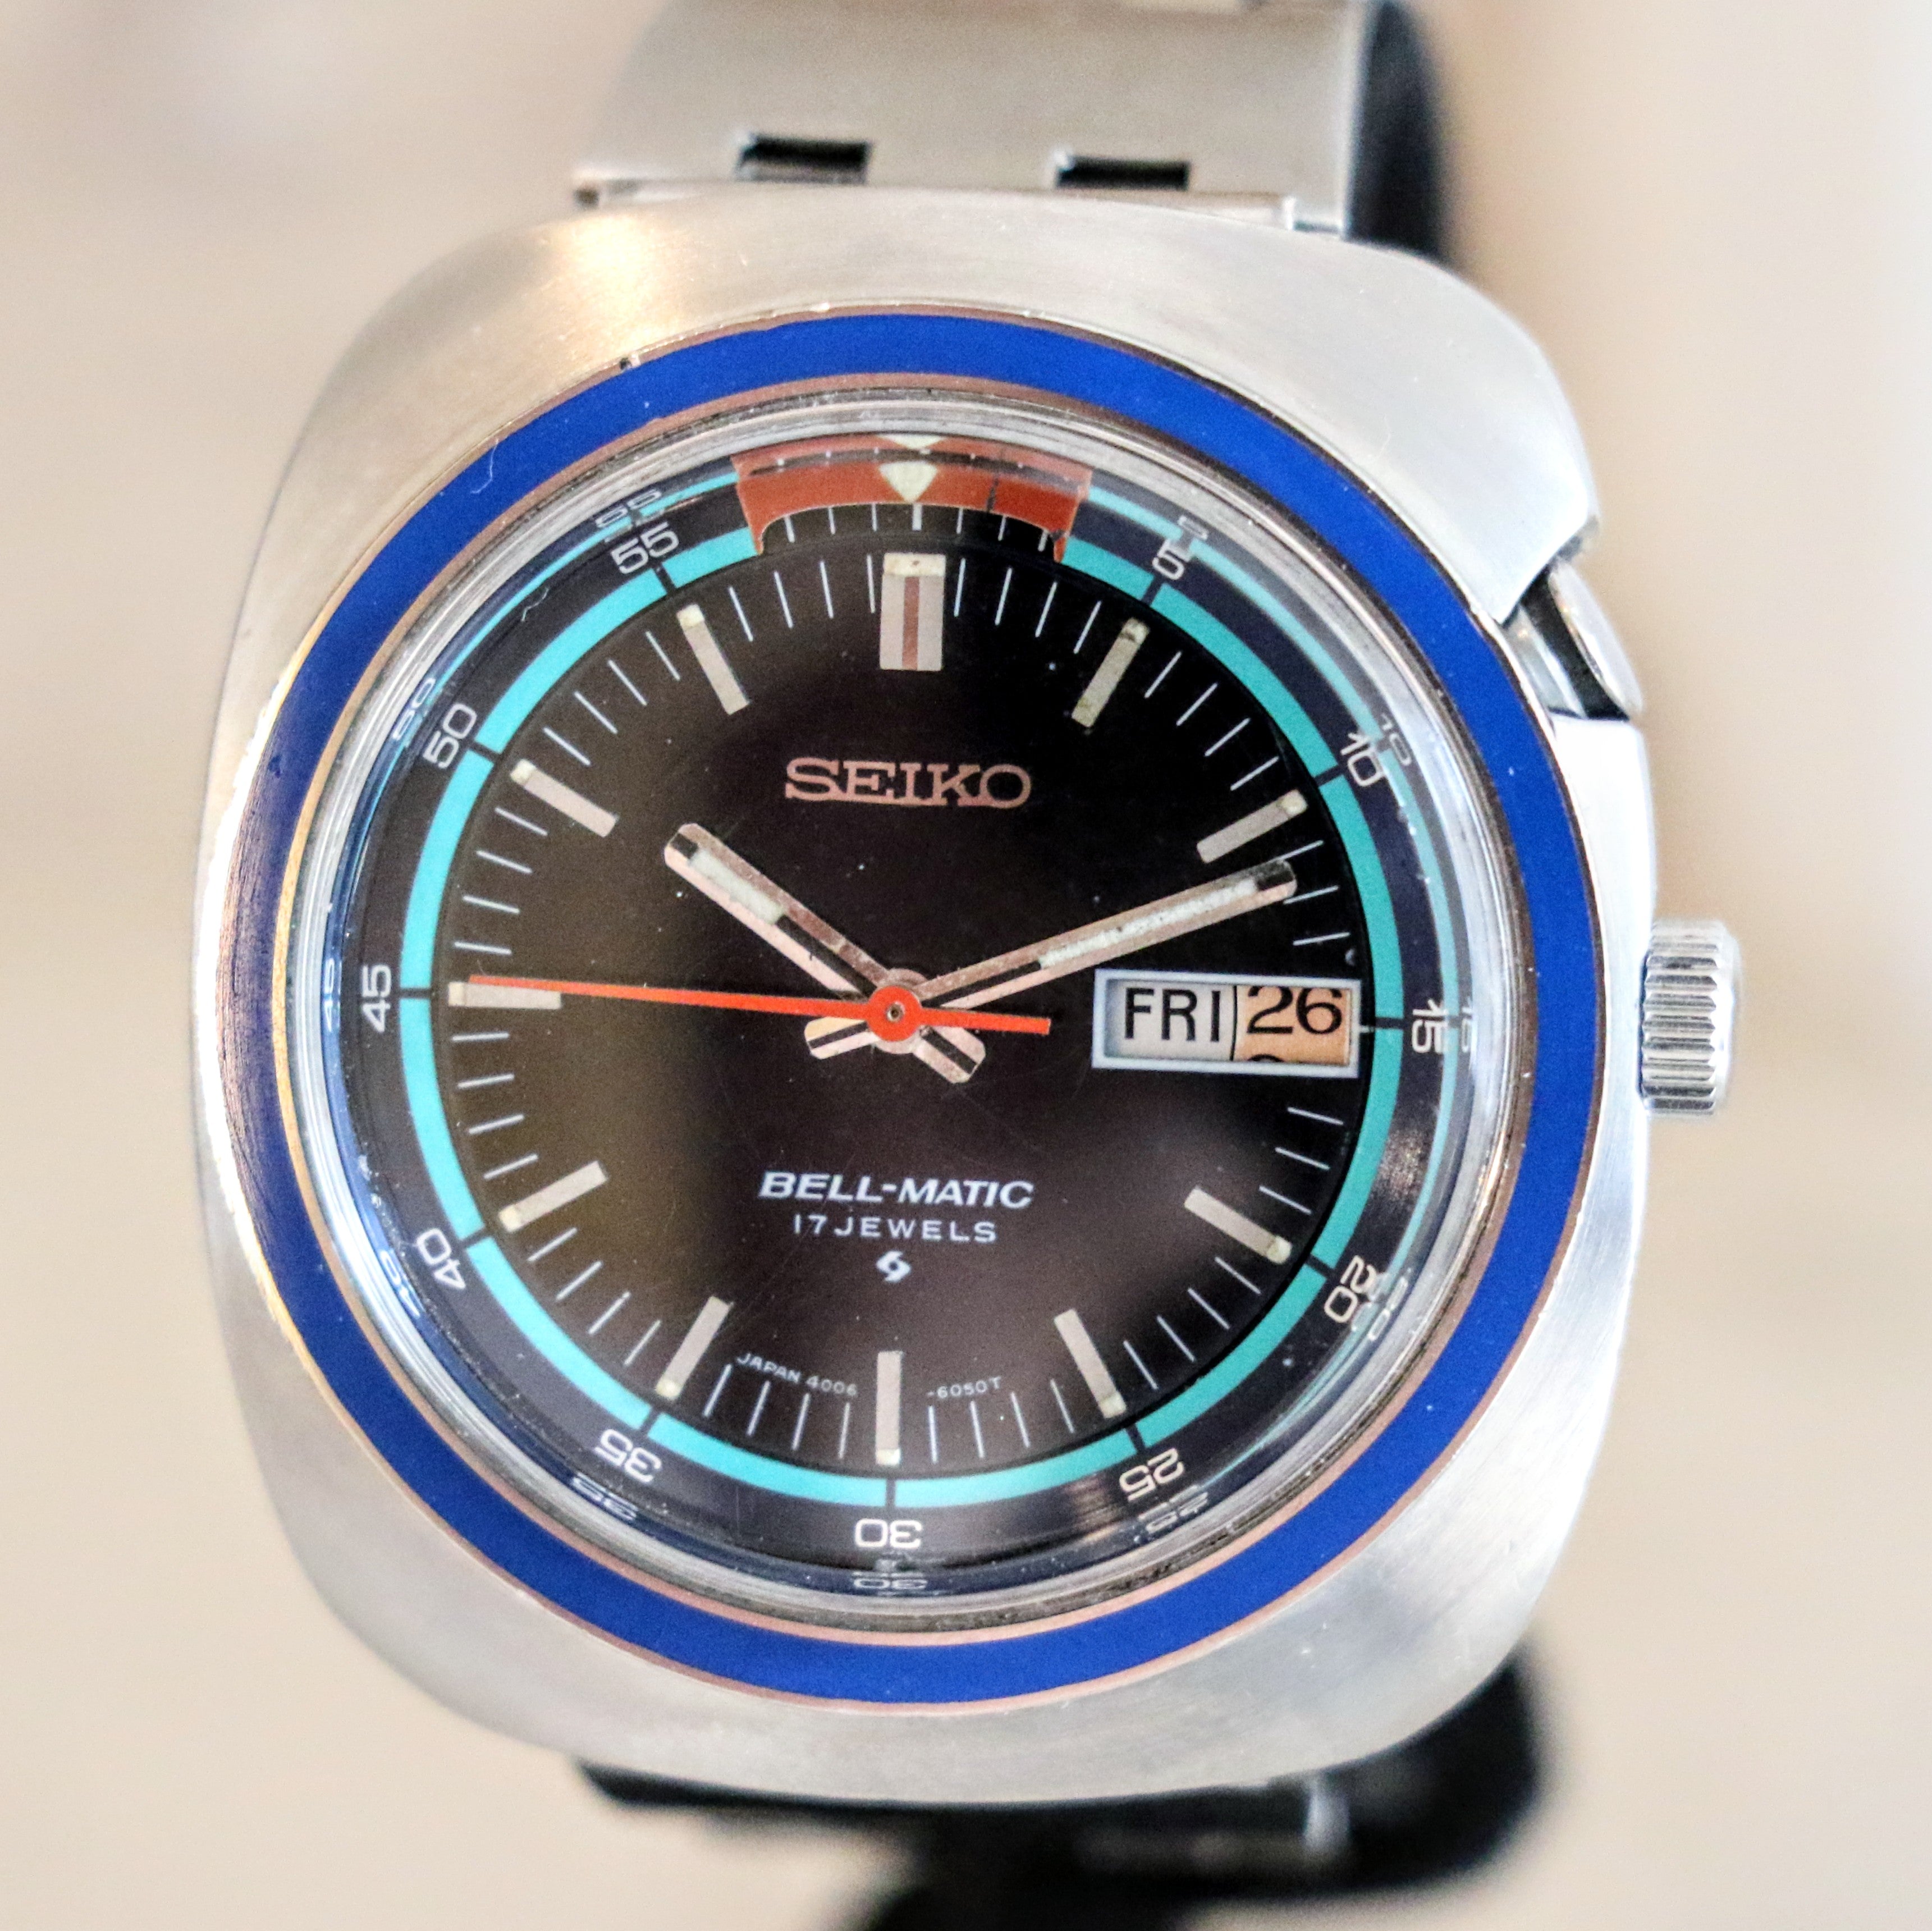 1973 SEIKO BELL-MATIC Watch Ref. 4006-6027 Automatic Alarm Wristwatch Day/Date Indicator